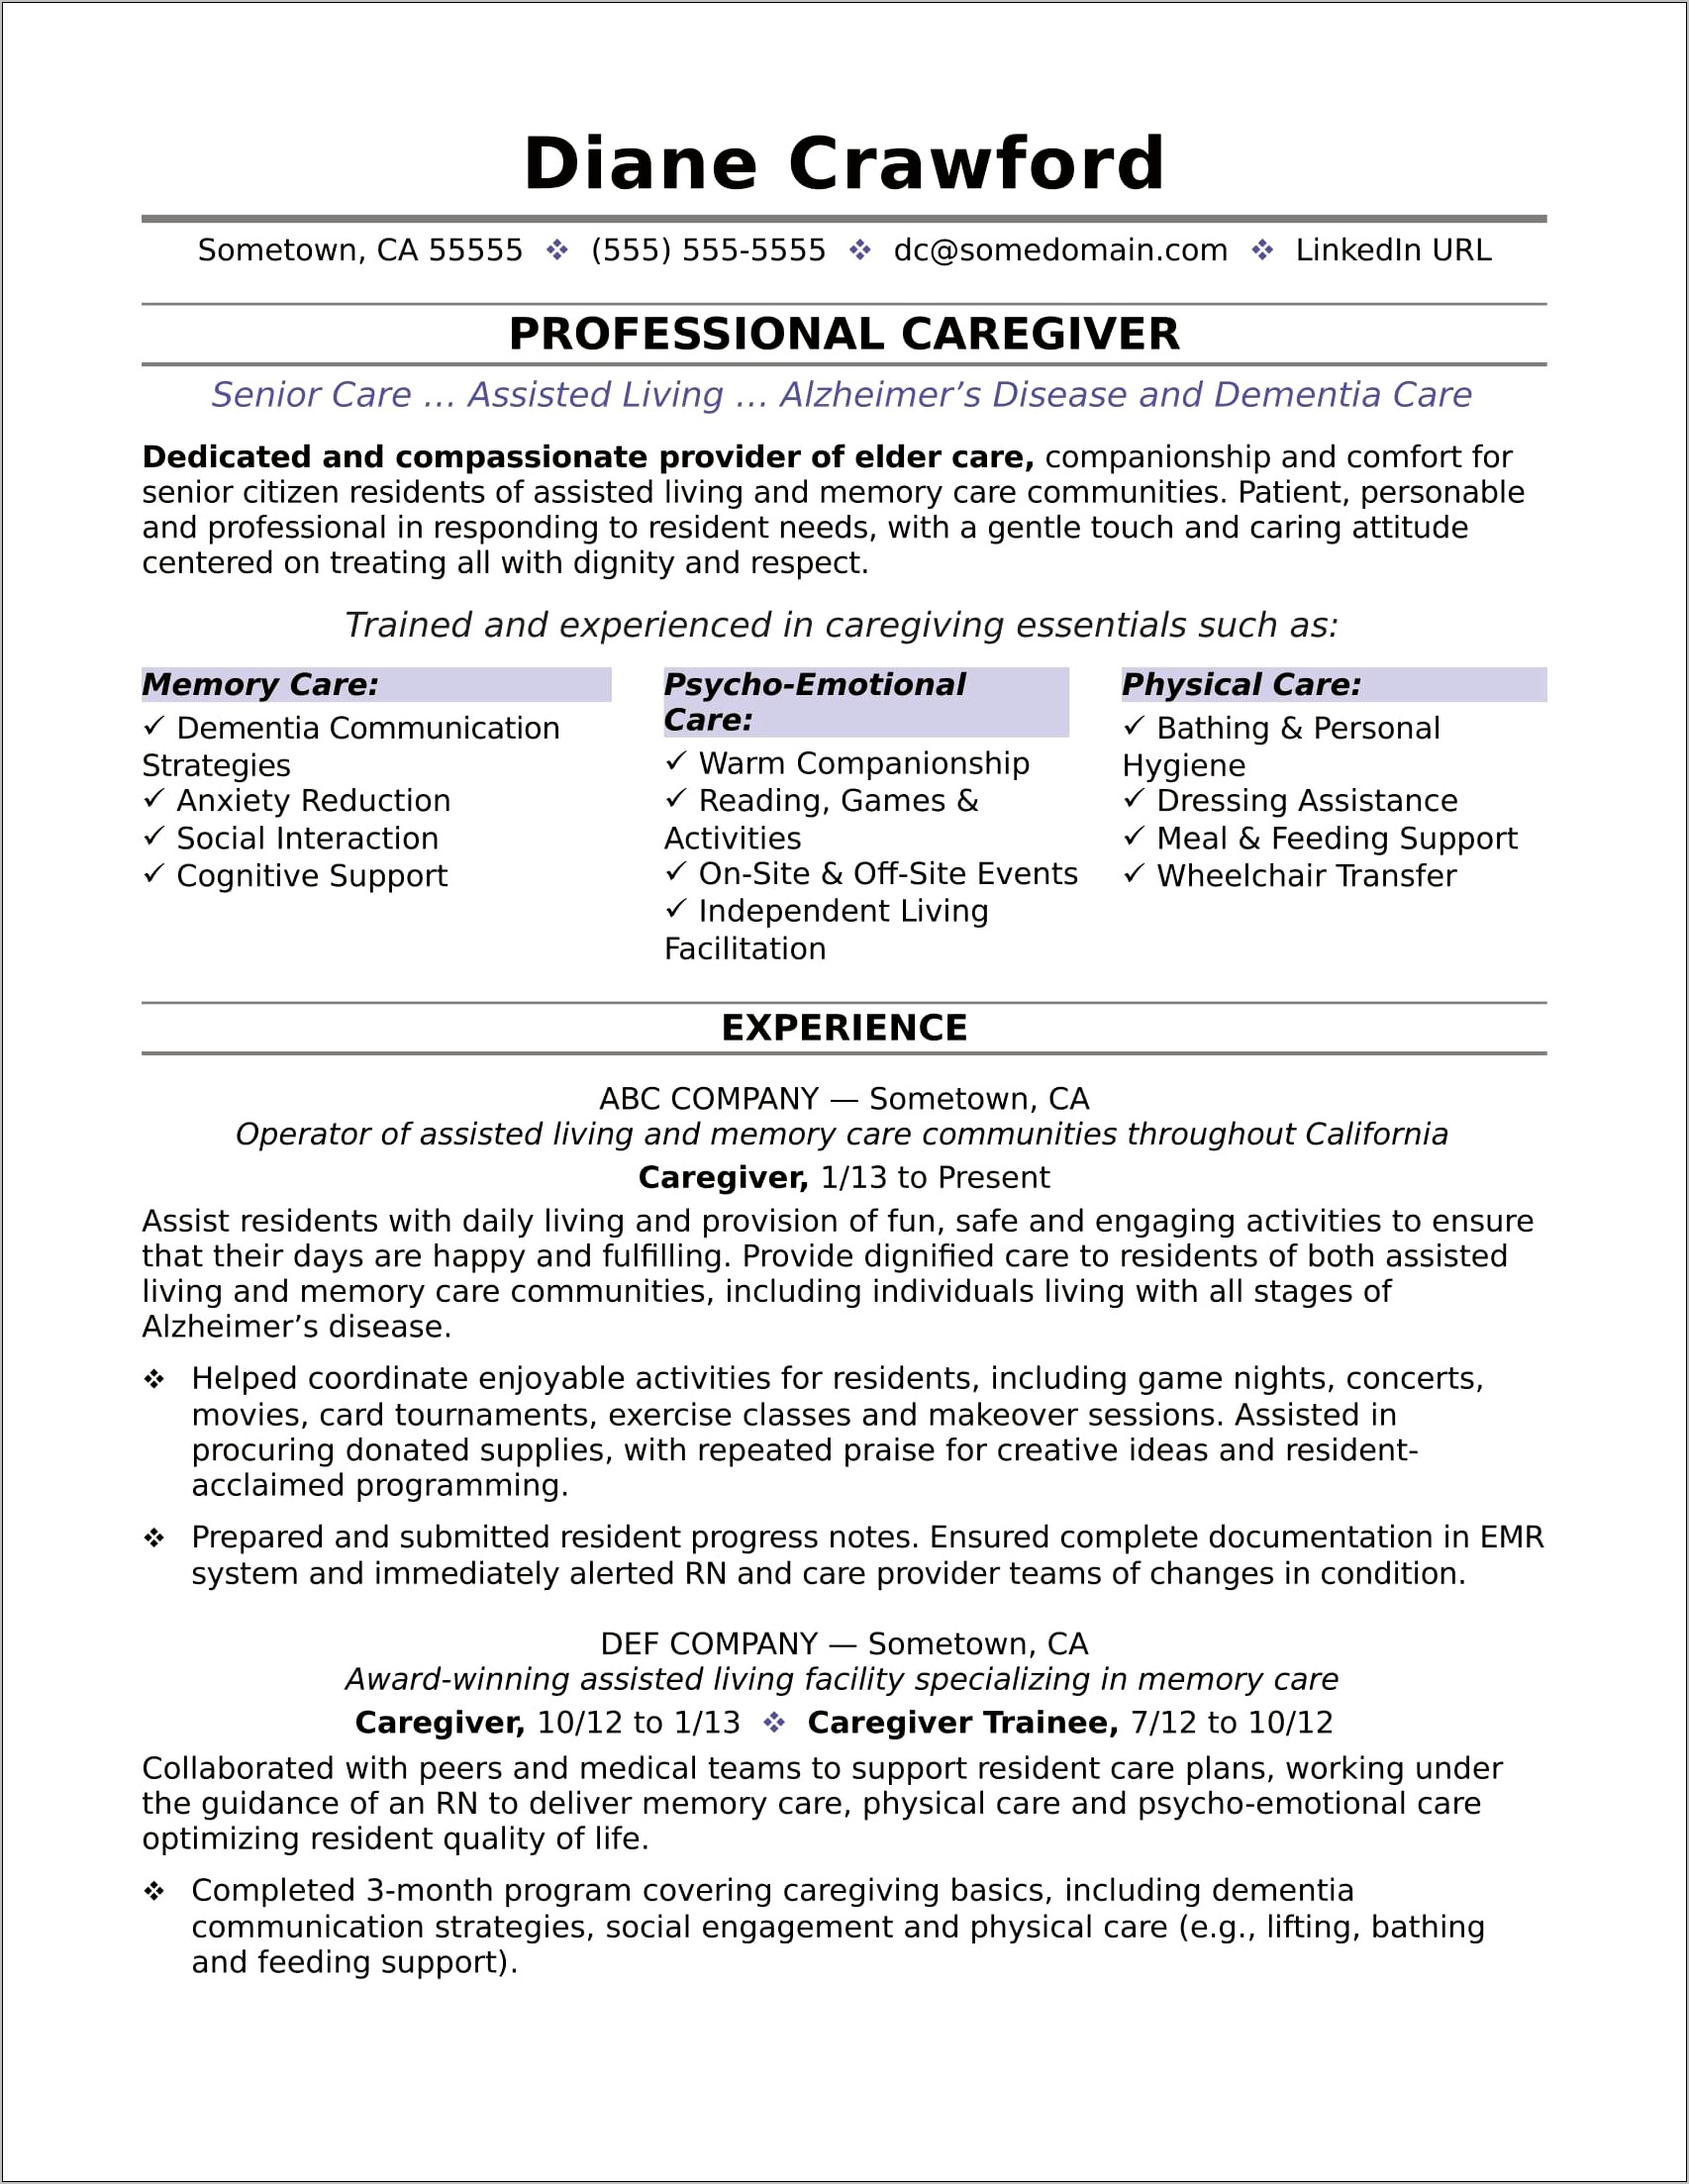 Resume Format For Jobs In New Jersey